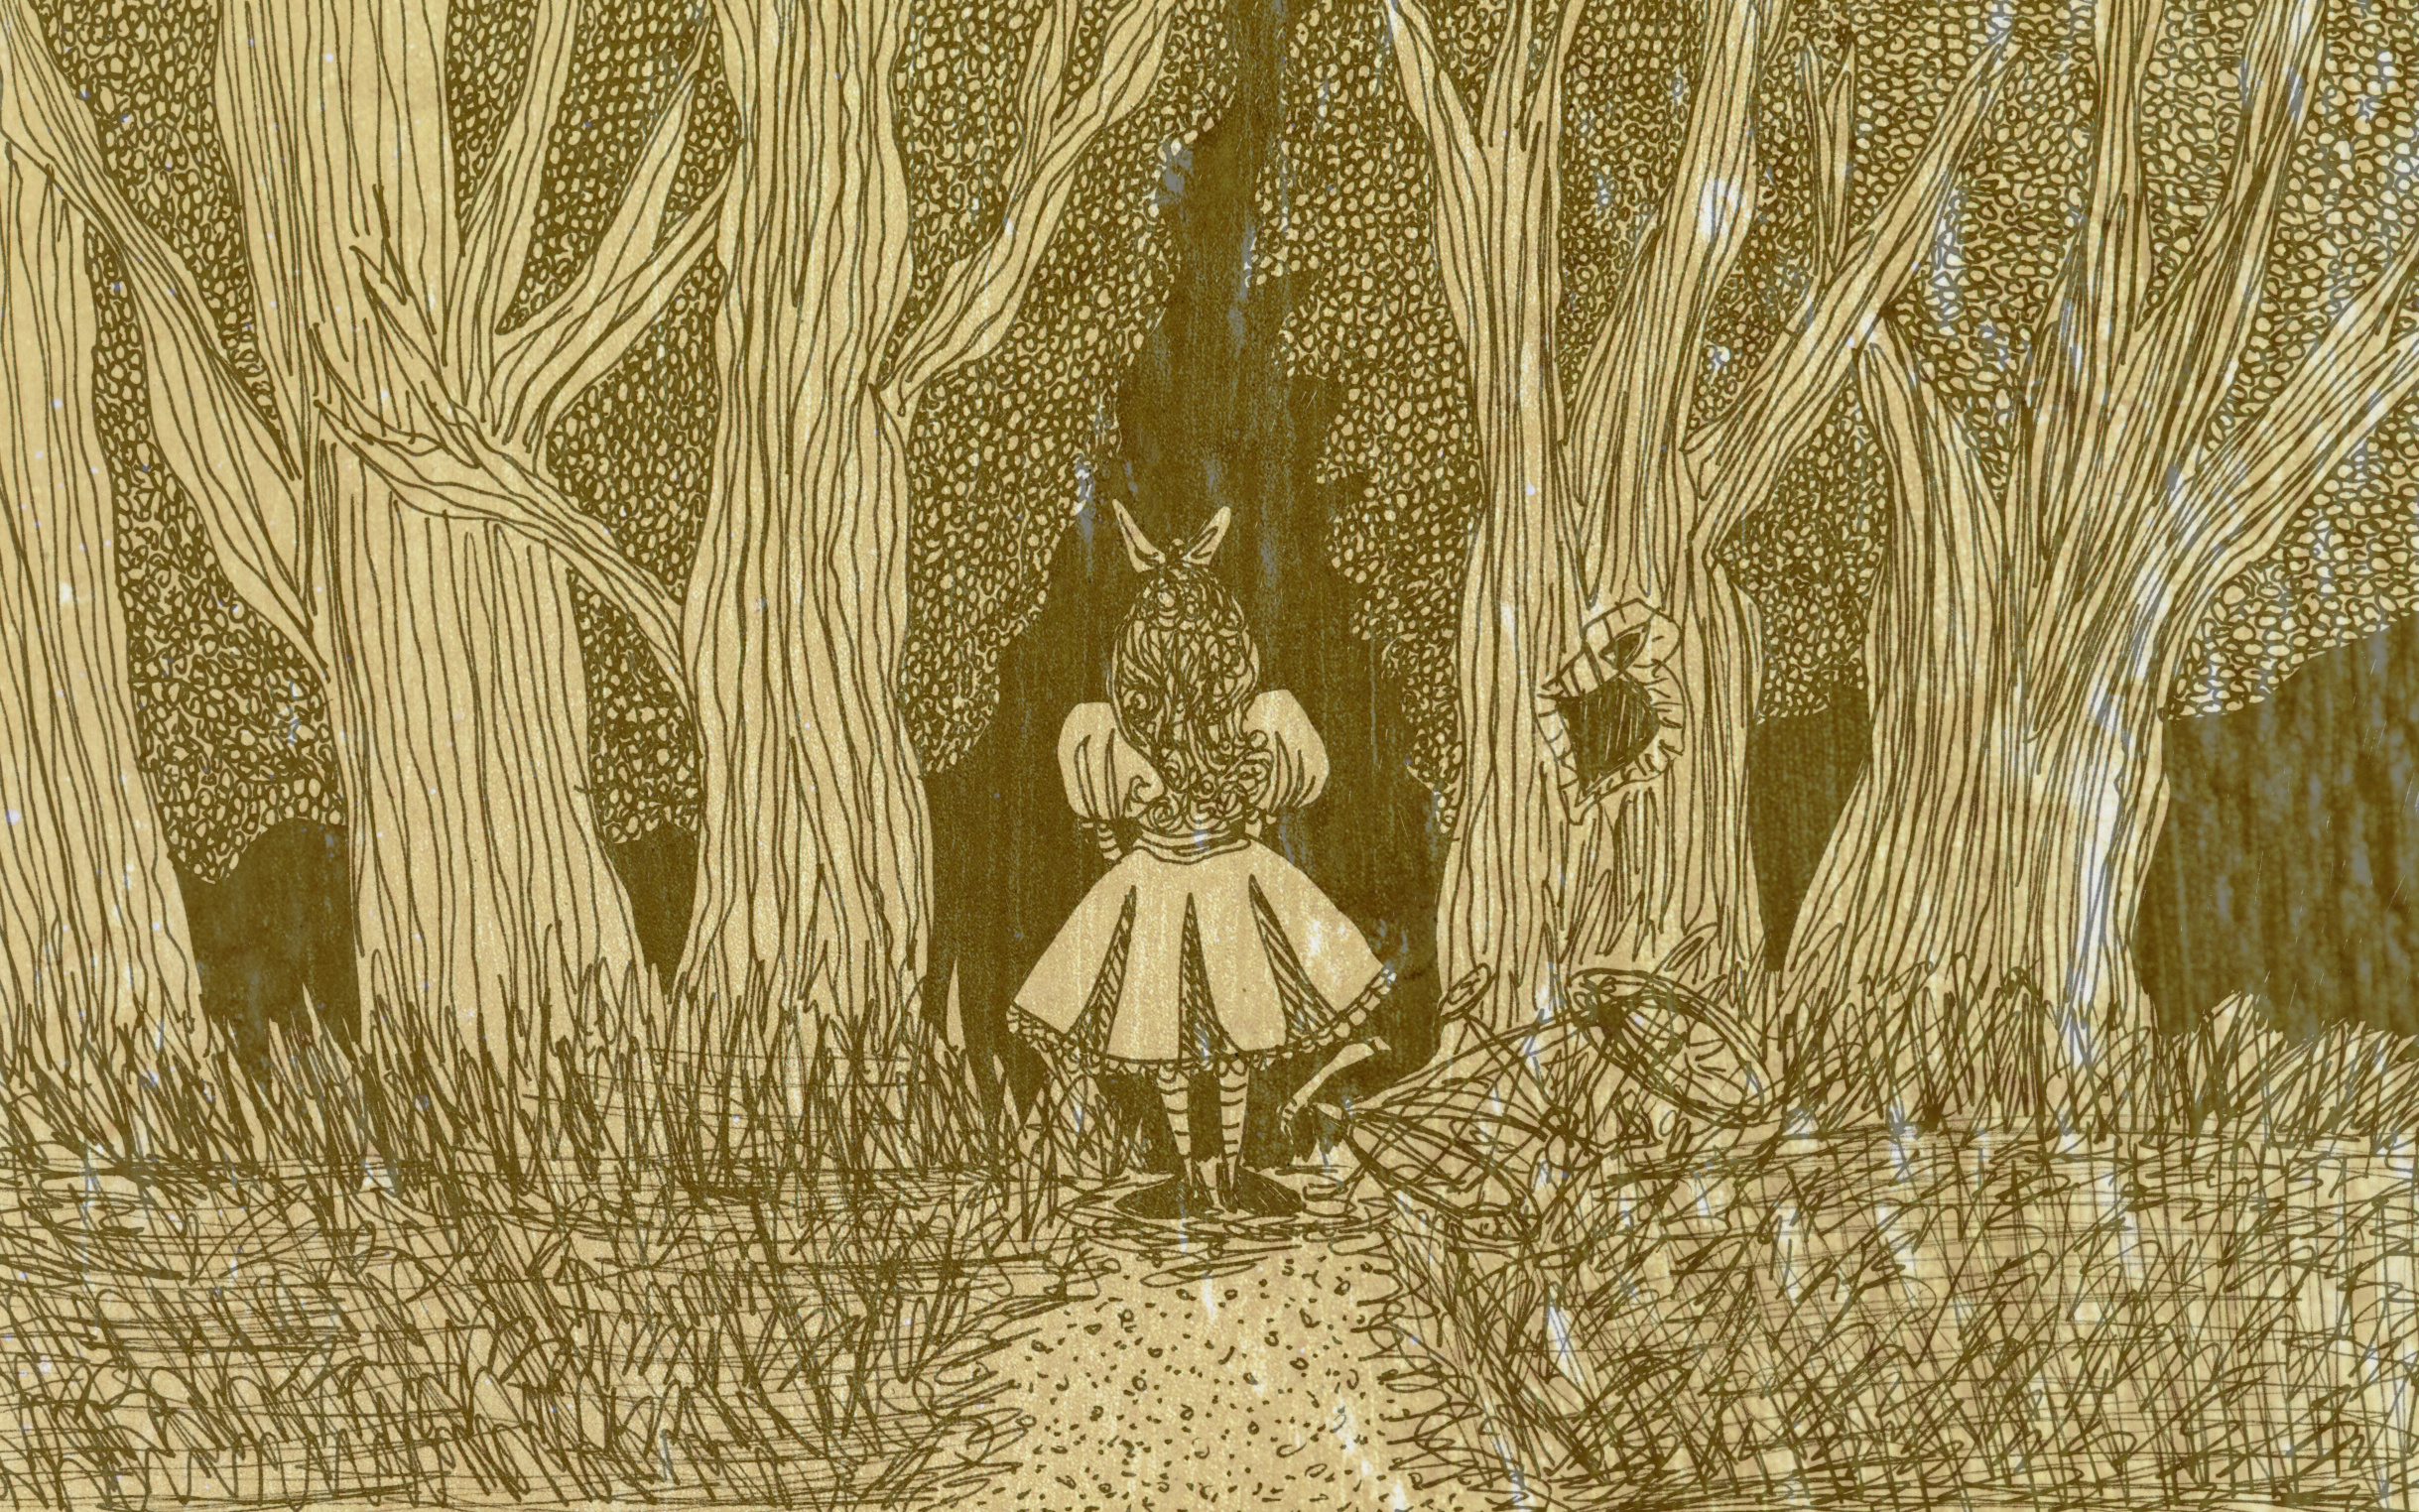 Image: Art of a girl entering a dark forest.